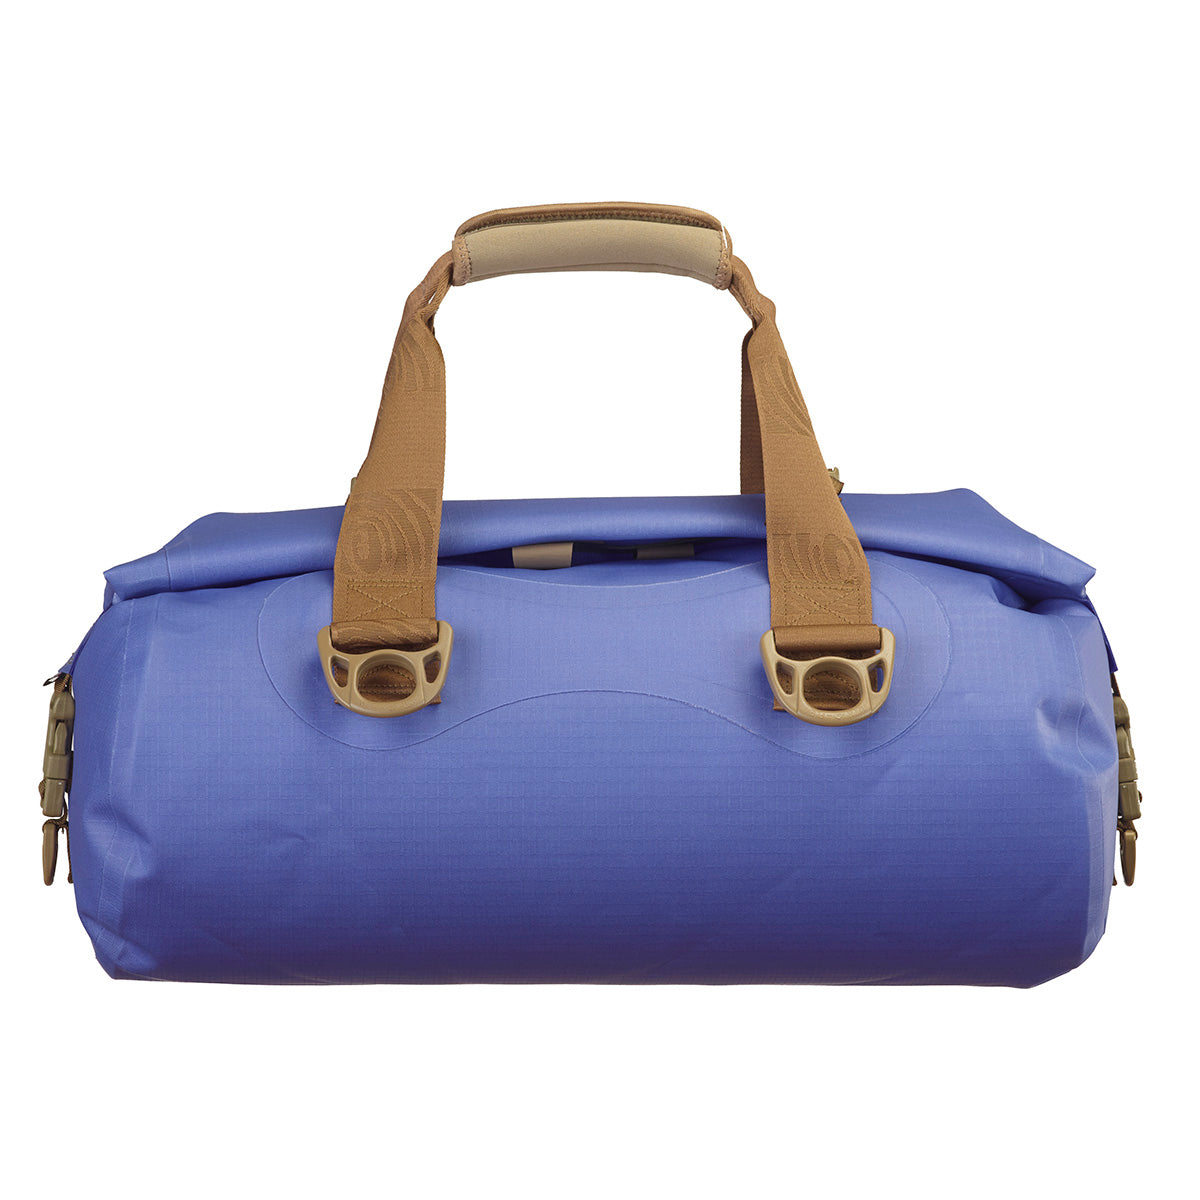 Watershed Chattooga Dry Duffel Bag